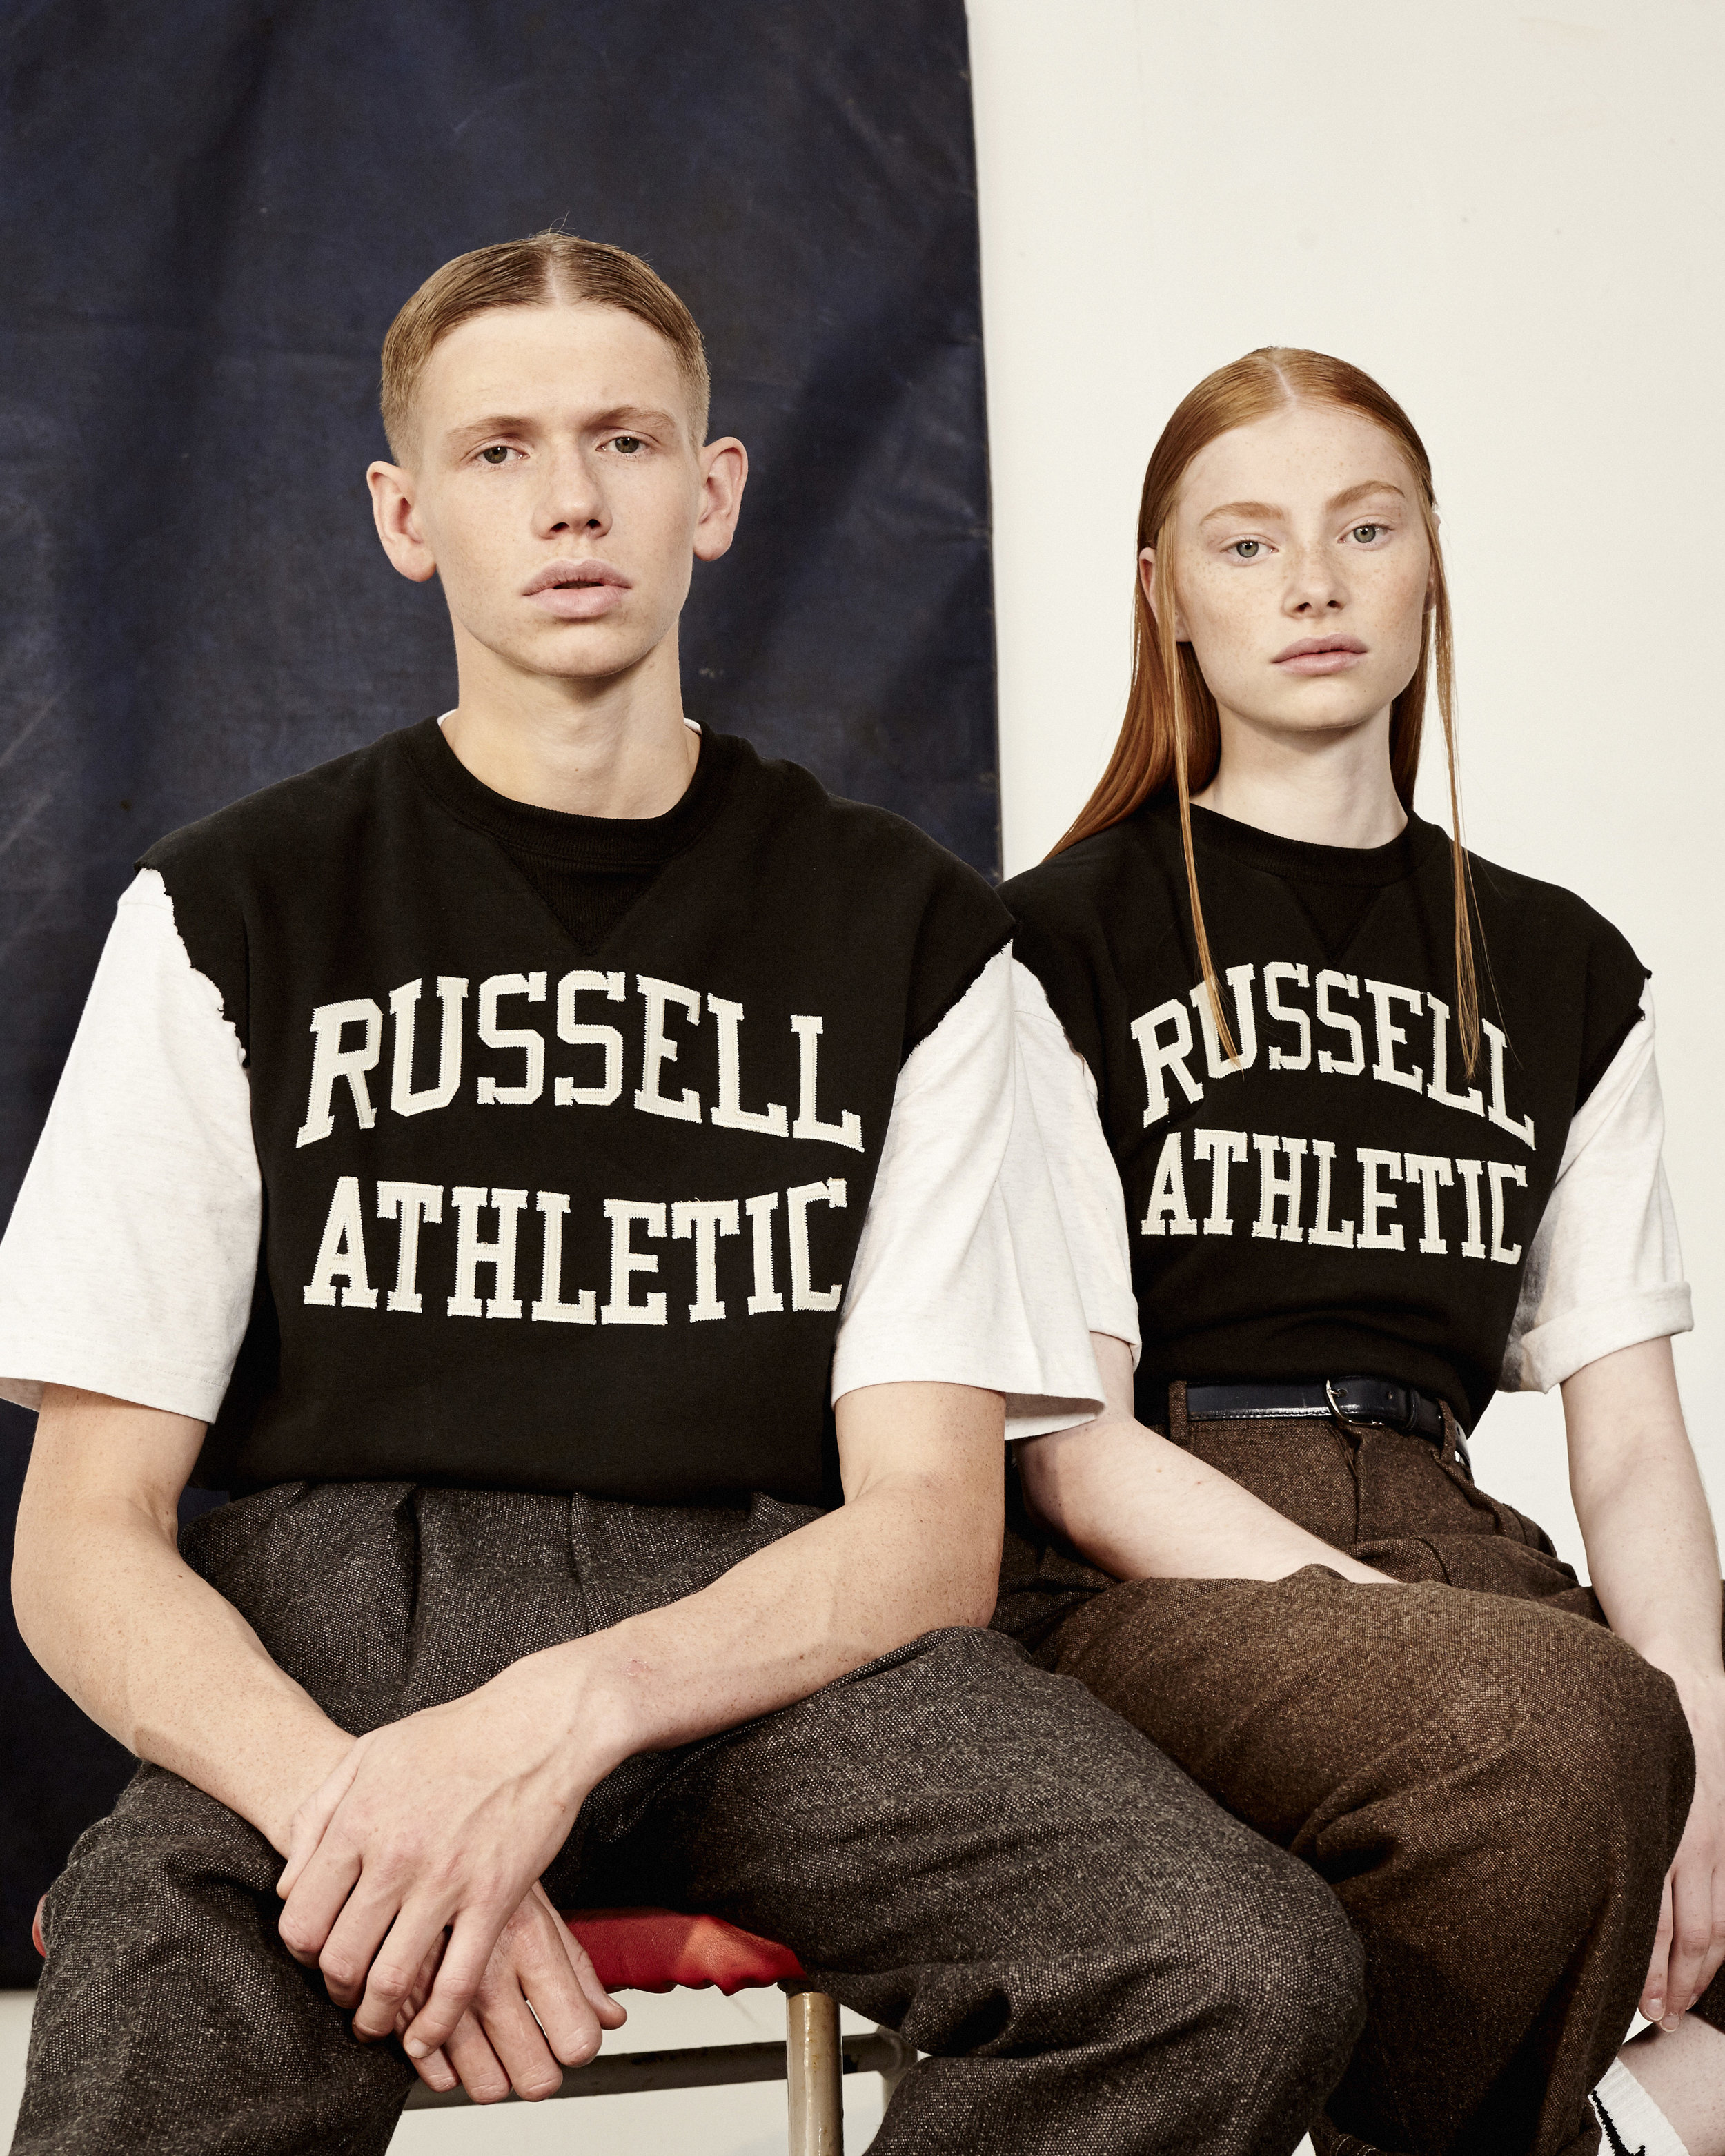 RUSSELL ATHLETIC SS1810589.jpg